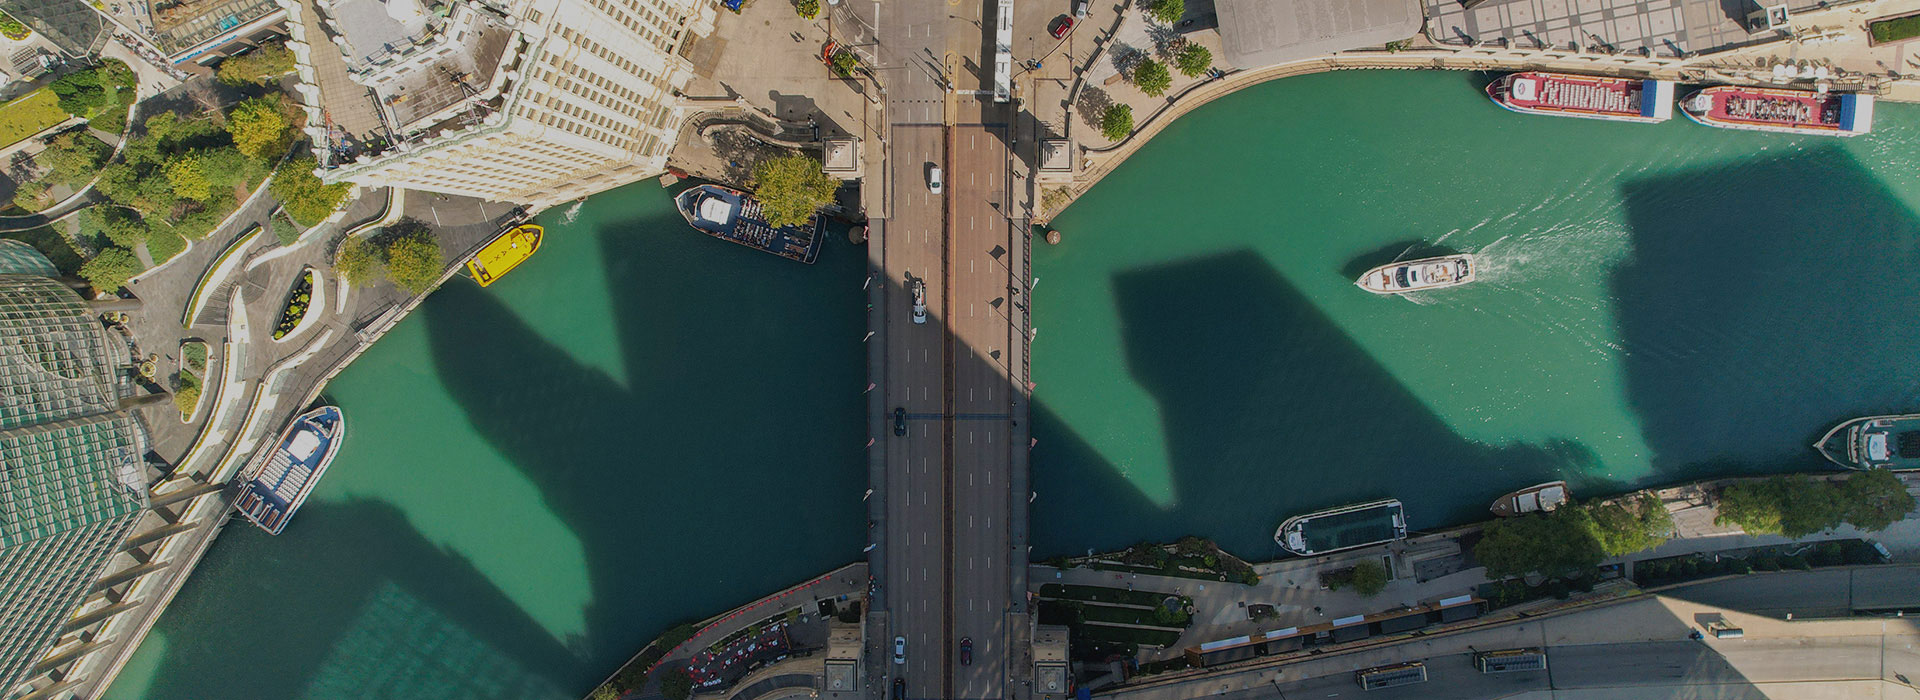 Overhead view of the Chicago river and bridge